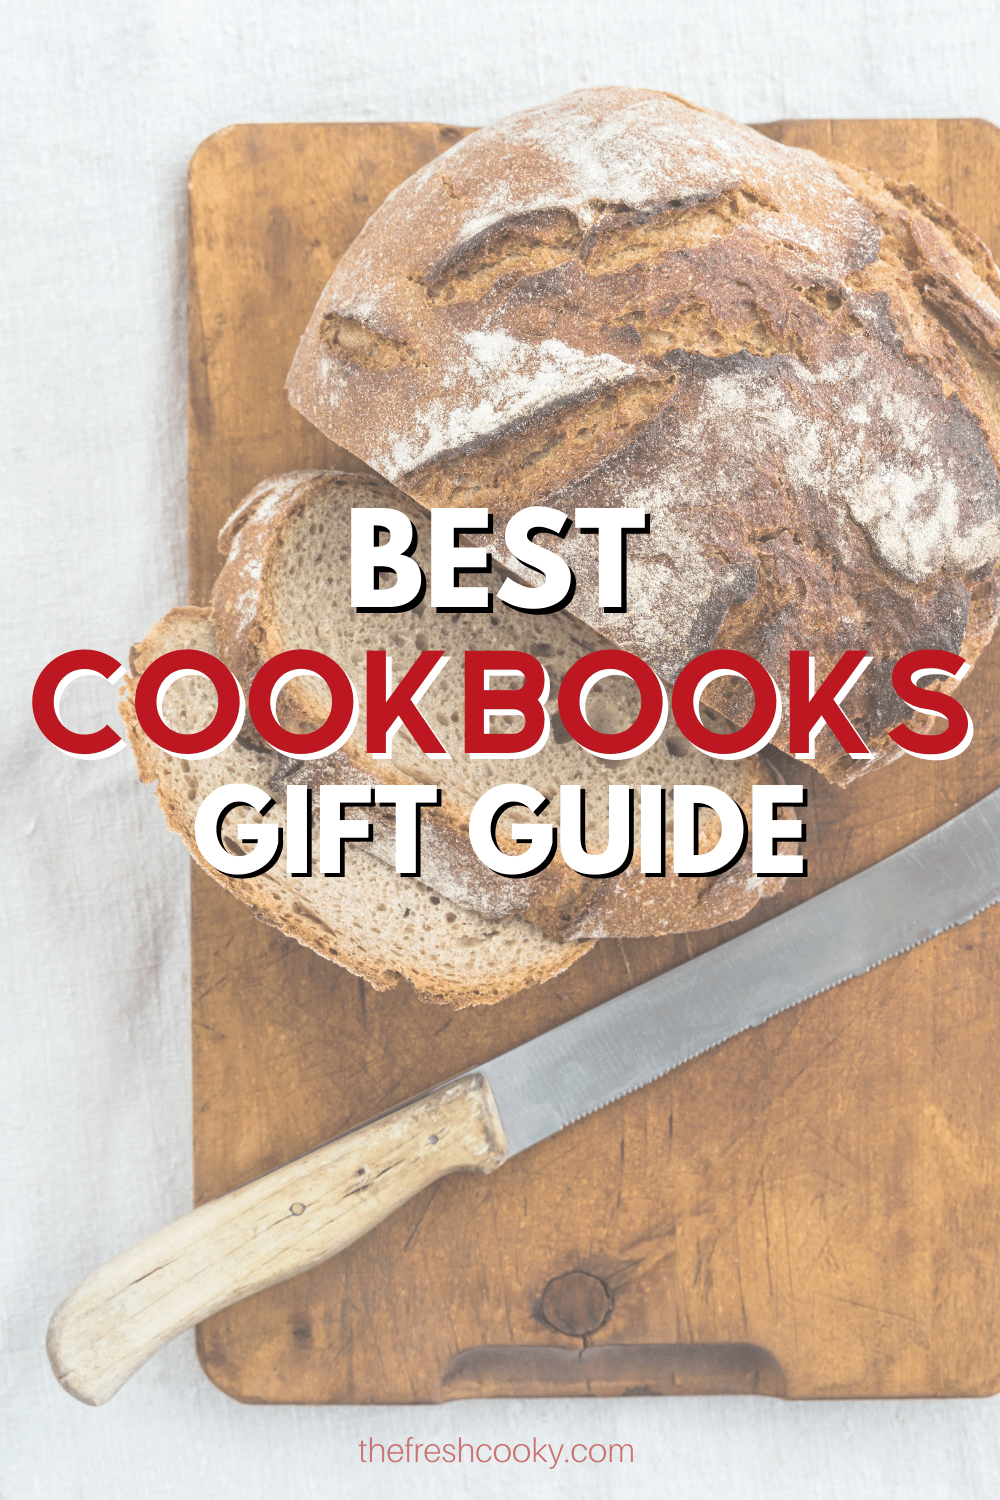 https://www.thefreshcooky.com/wp-content/uploads/2020/11/2021-Cookbook-Gift-Guide-2.png